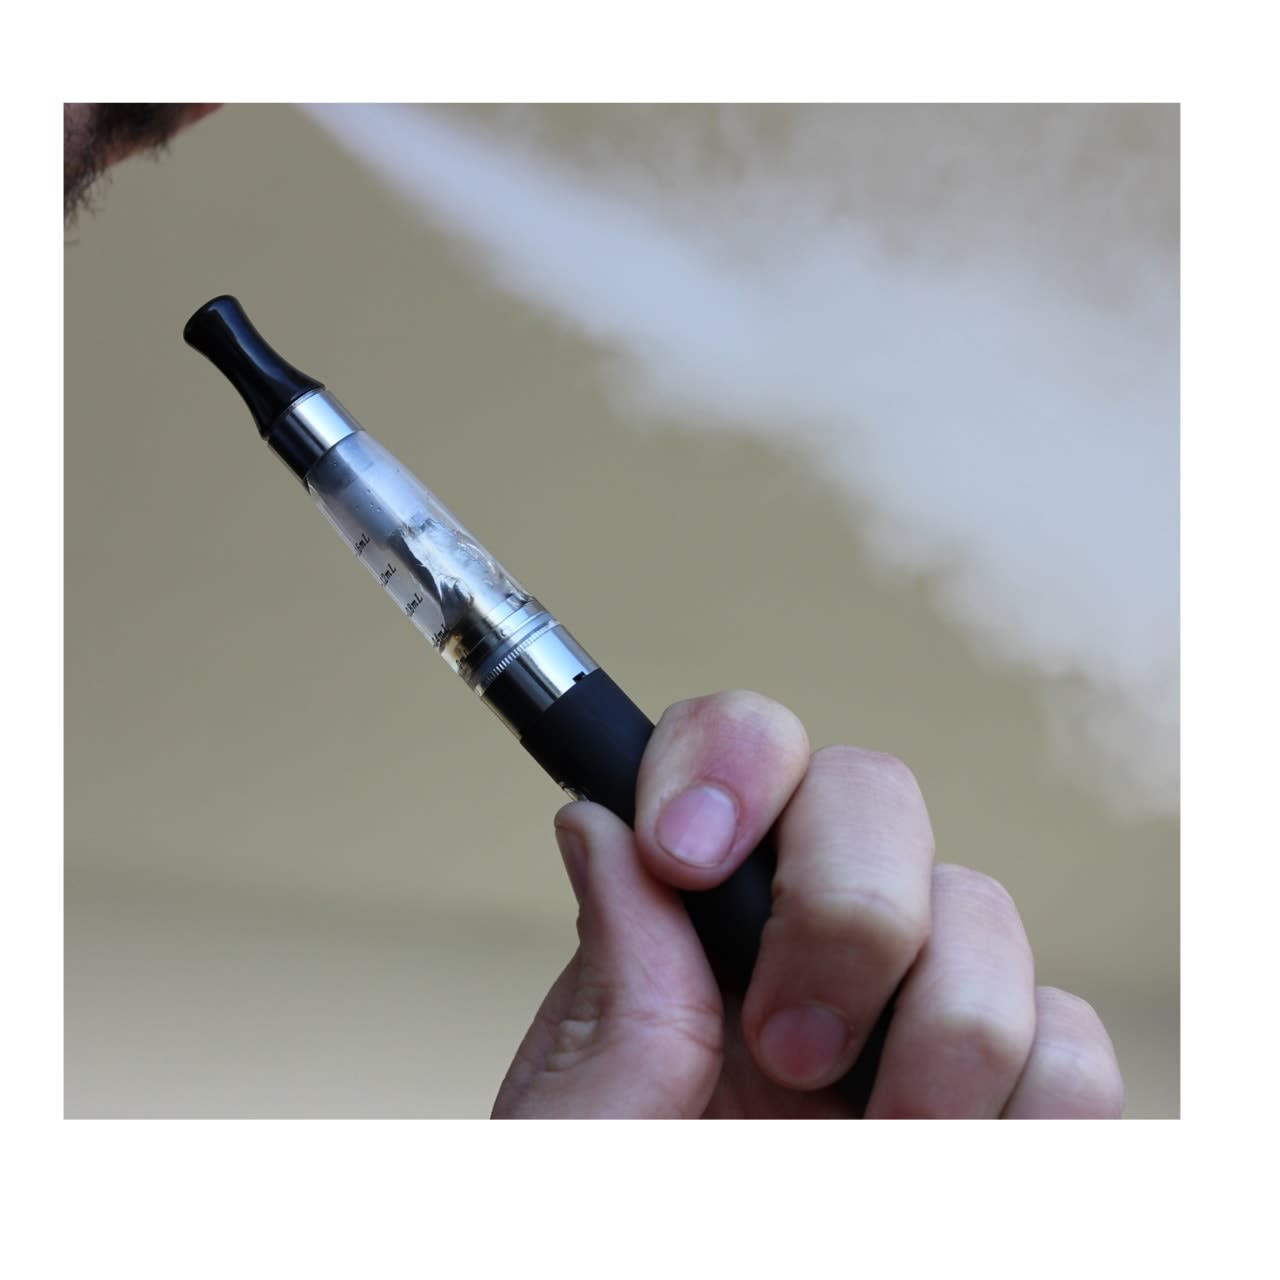 Some store clerks on Long Island are facing charges for allegedly selling e-cigarette items to minors.